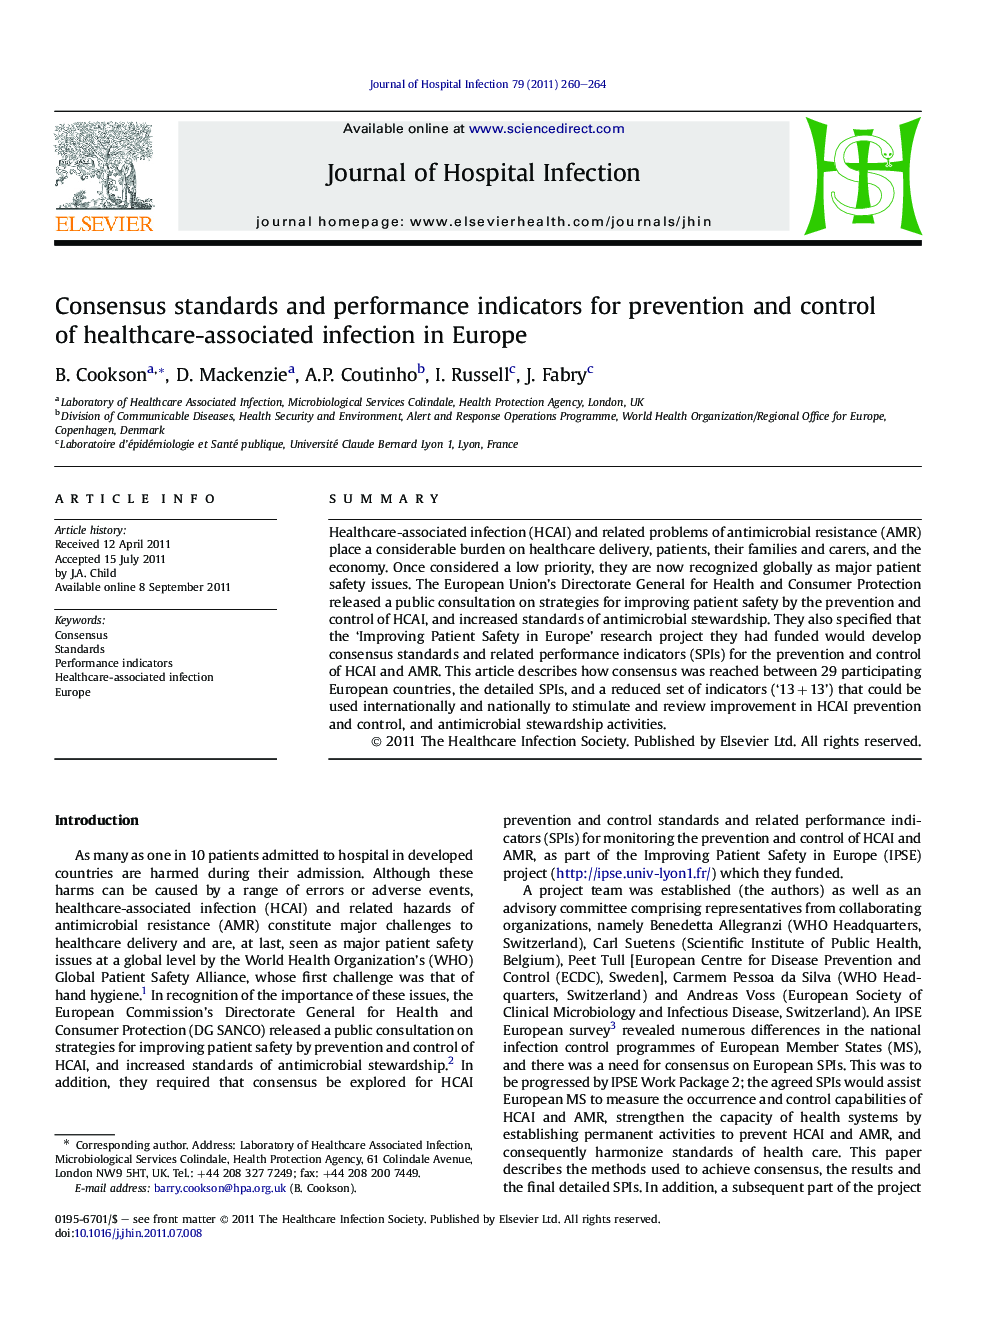 Consensus standards and performance indicators for prevention and control of healthcare-associated infection in Europe